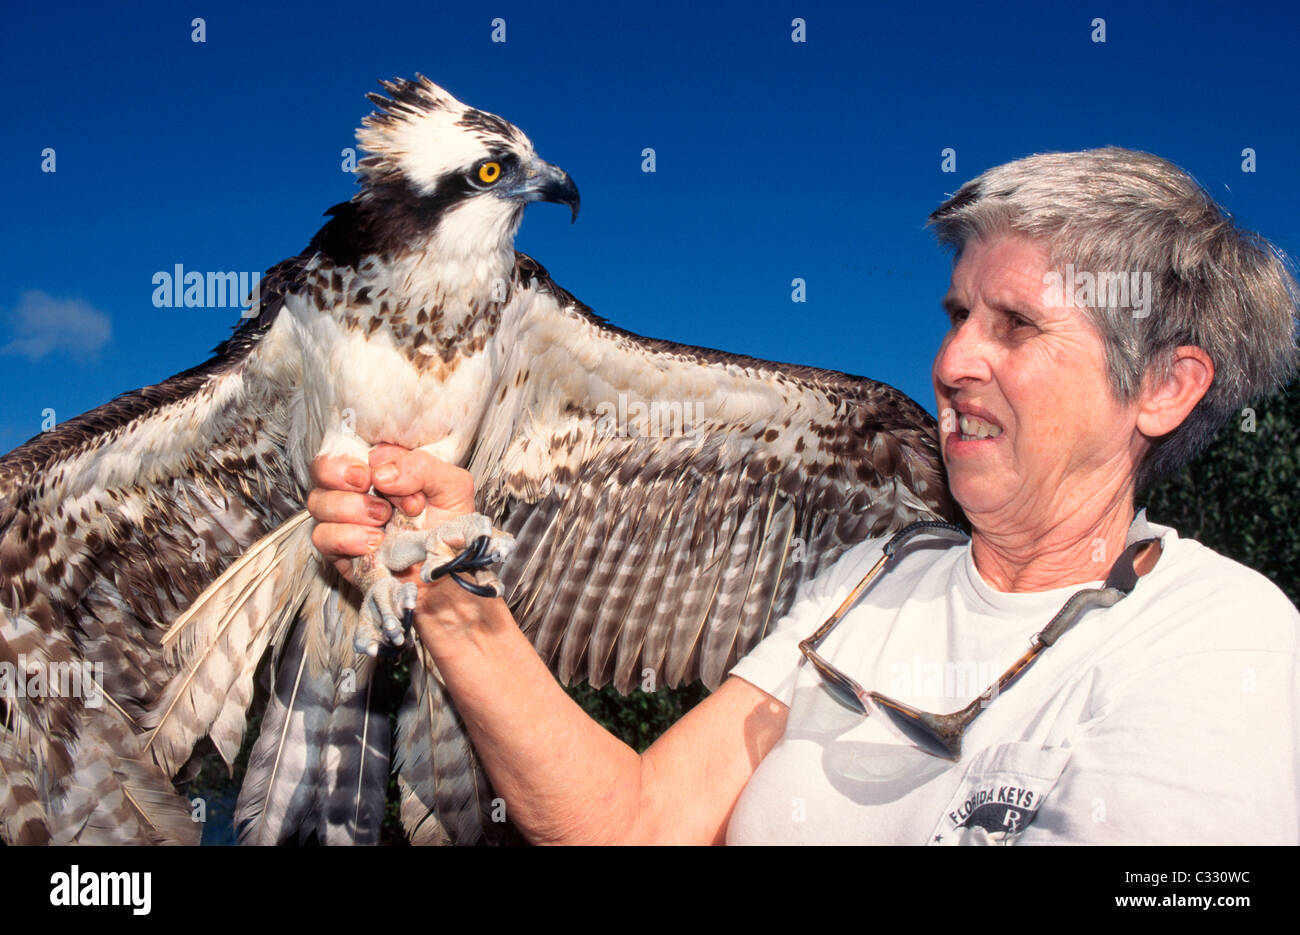 An injured Osprey spreads its wings while being held by a volunteer at a wild bird sanctuary in Tavernier, Florida, USA. Stock Photo